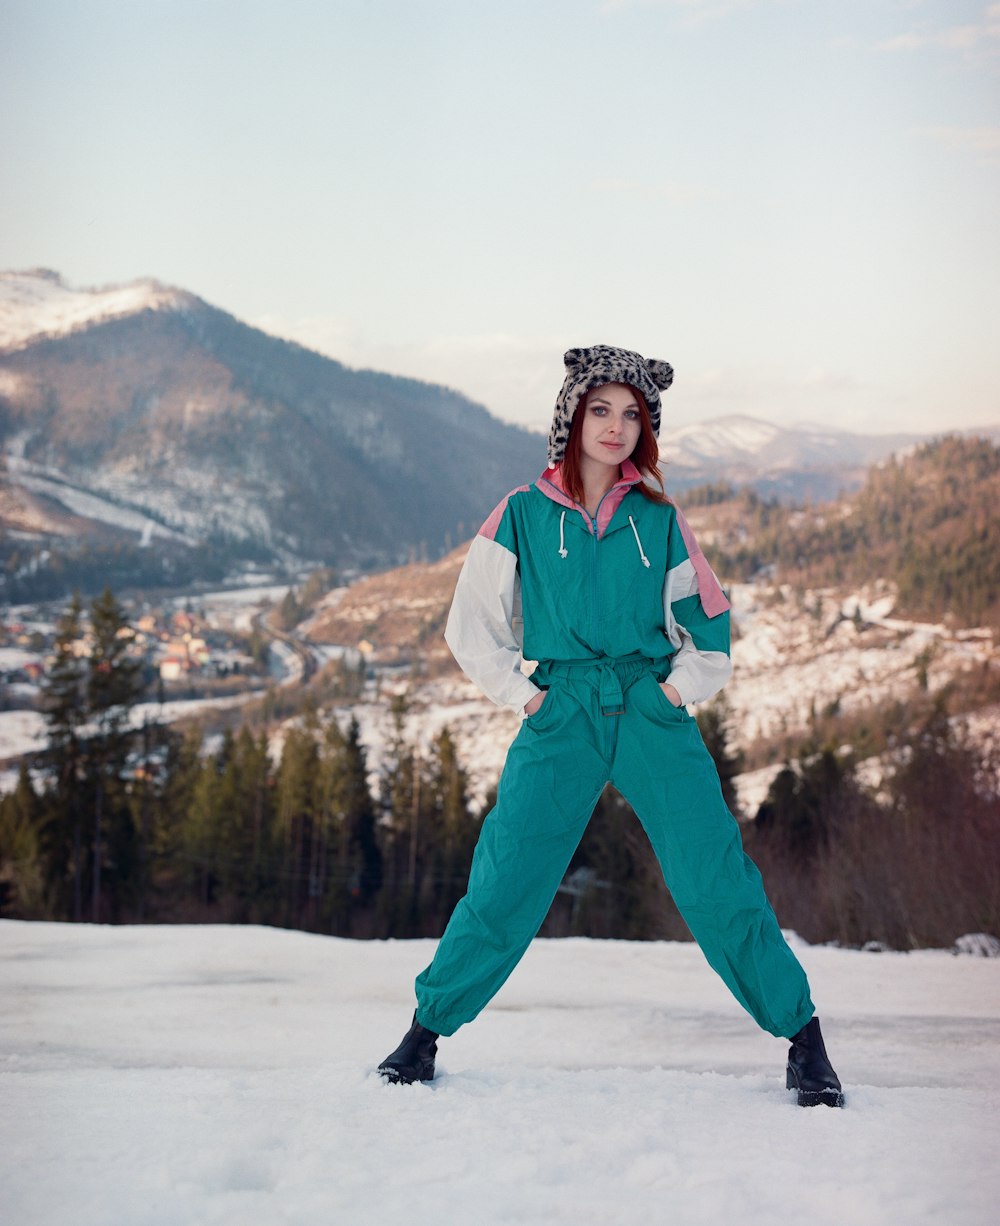 a man in a green and white outfit standing on snow with trees and mountains in the background